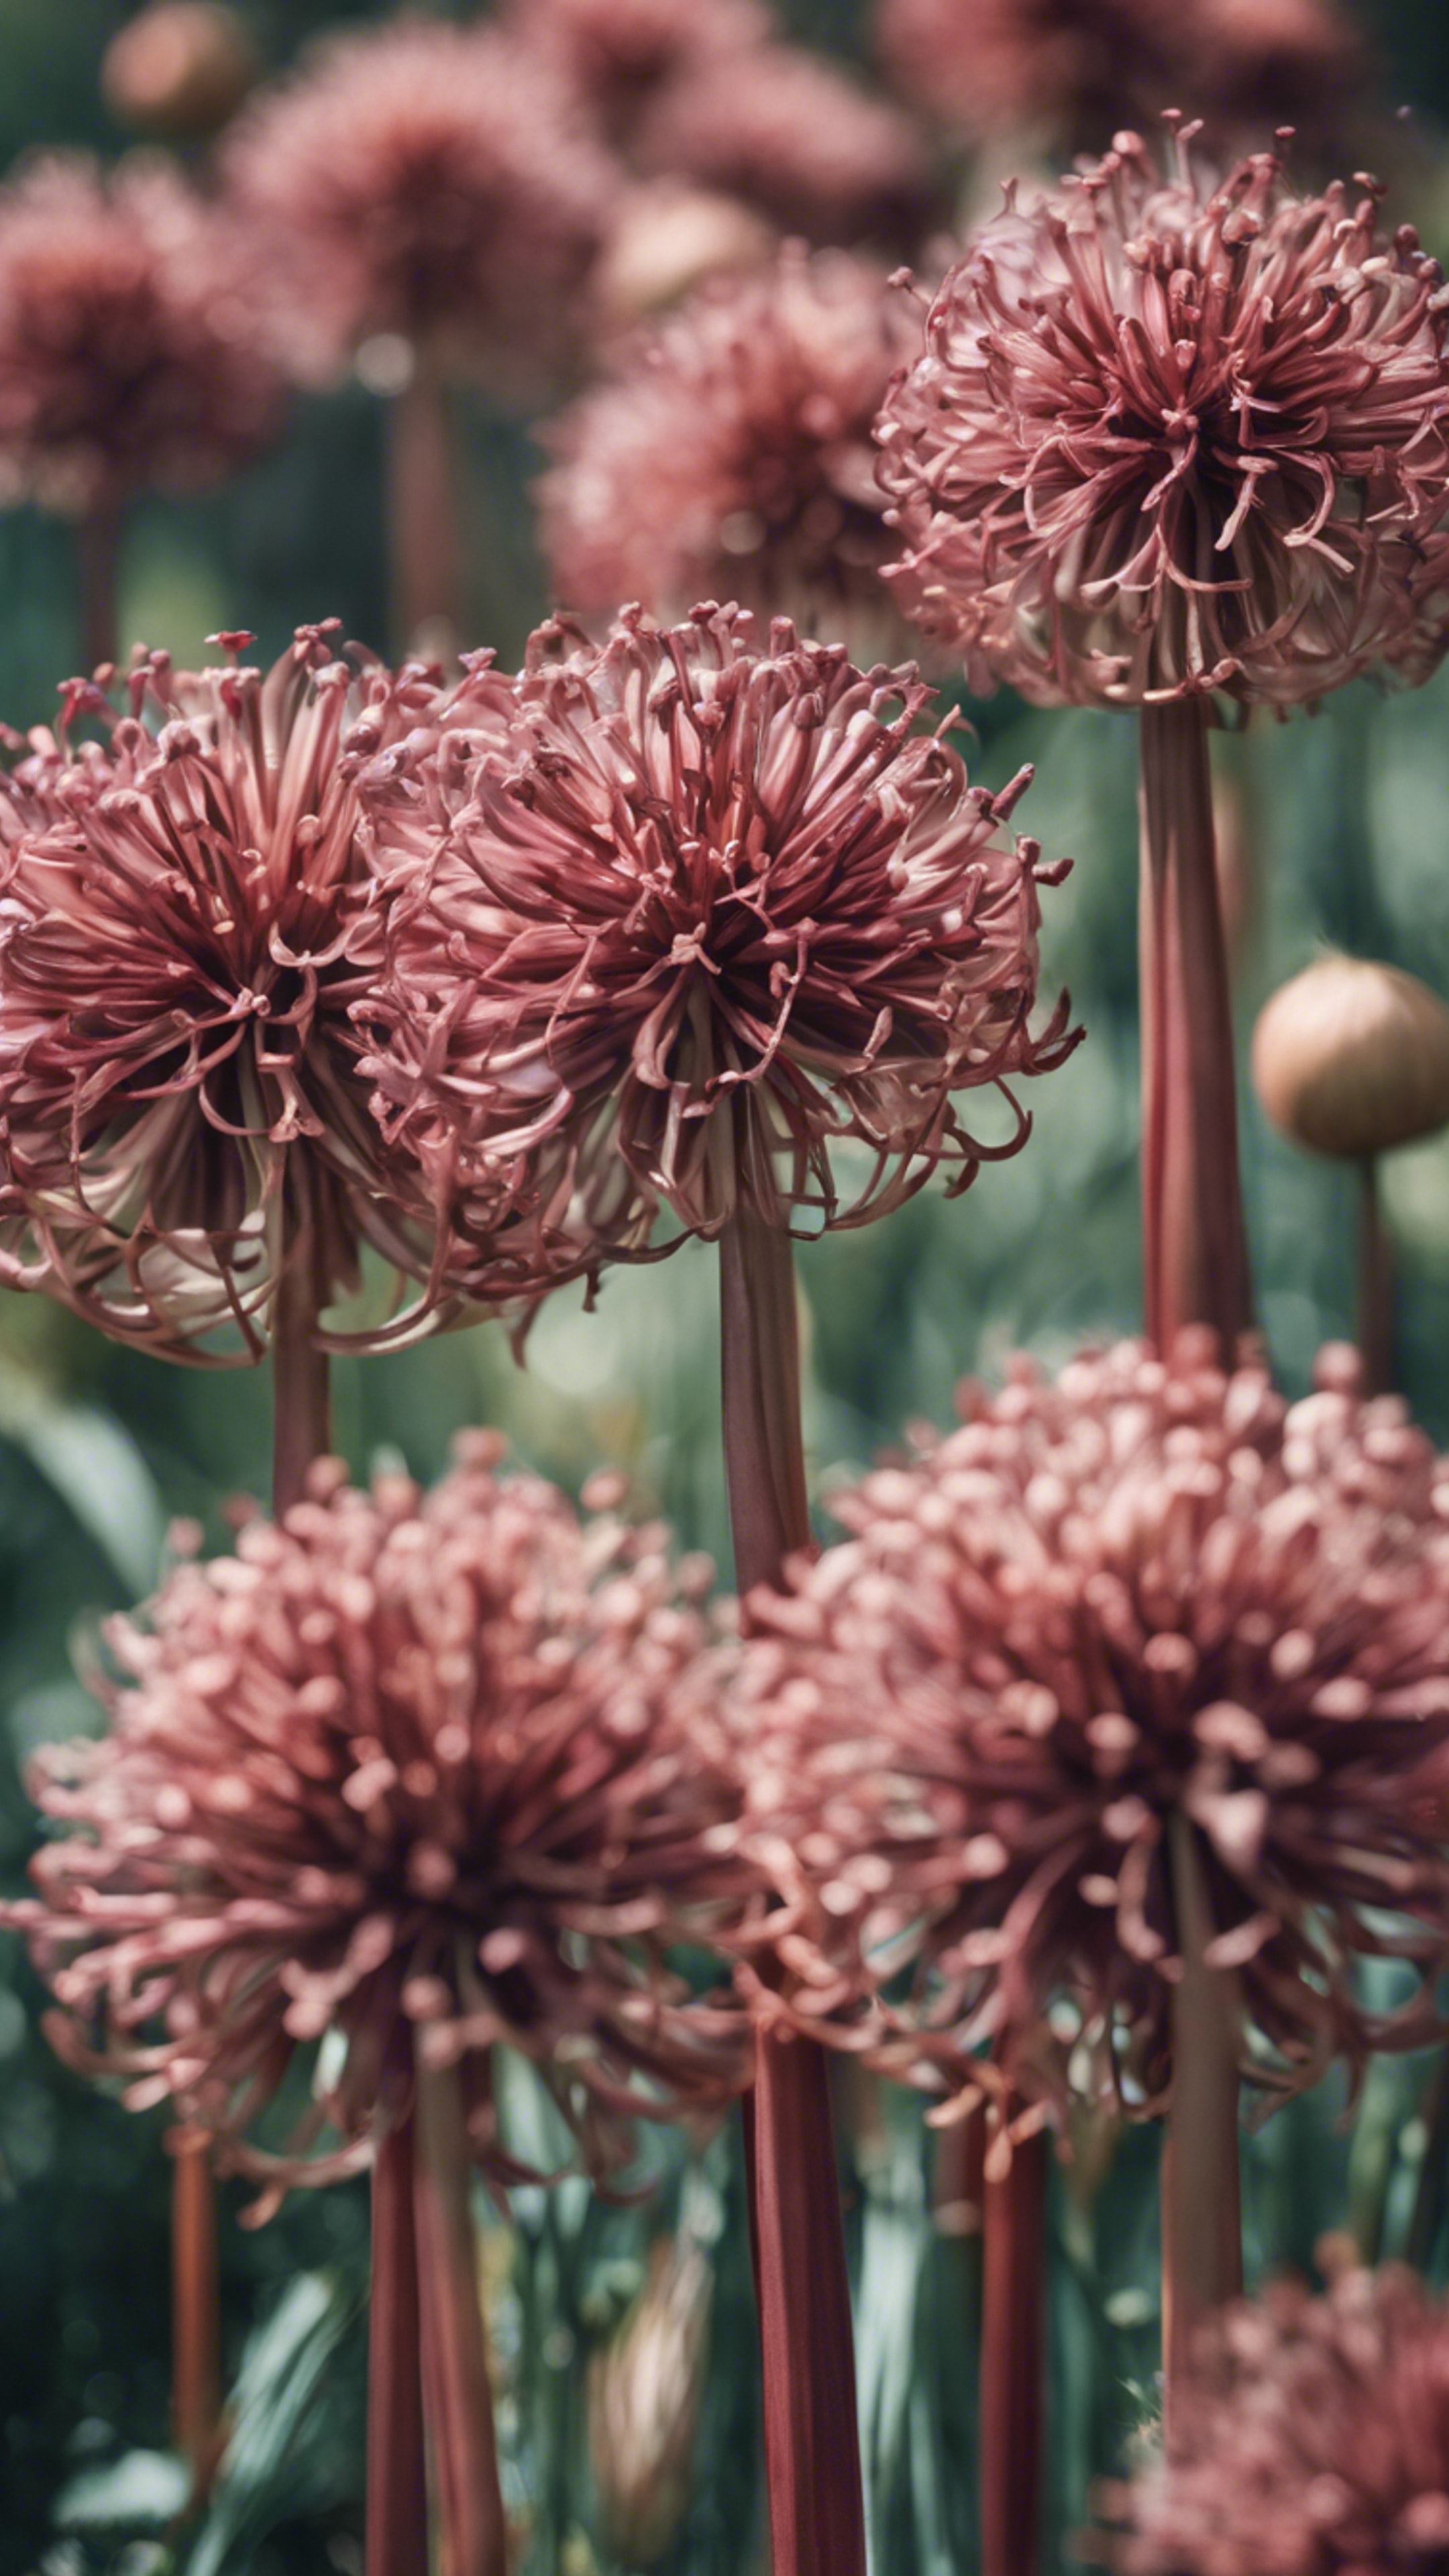 Immerse in nature with a valiant, organic motif of red-washed and brown alliums, harmoniously repeating. Tapeta[b1ade6bf63d74276ba8b]